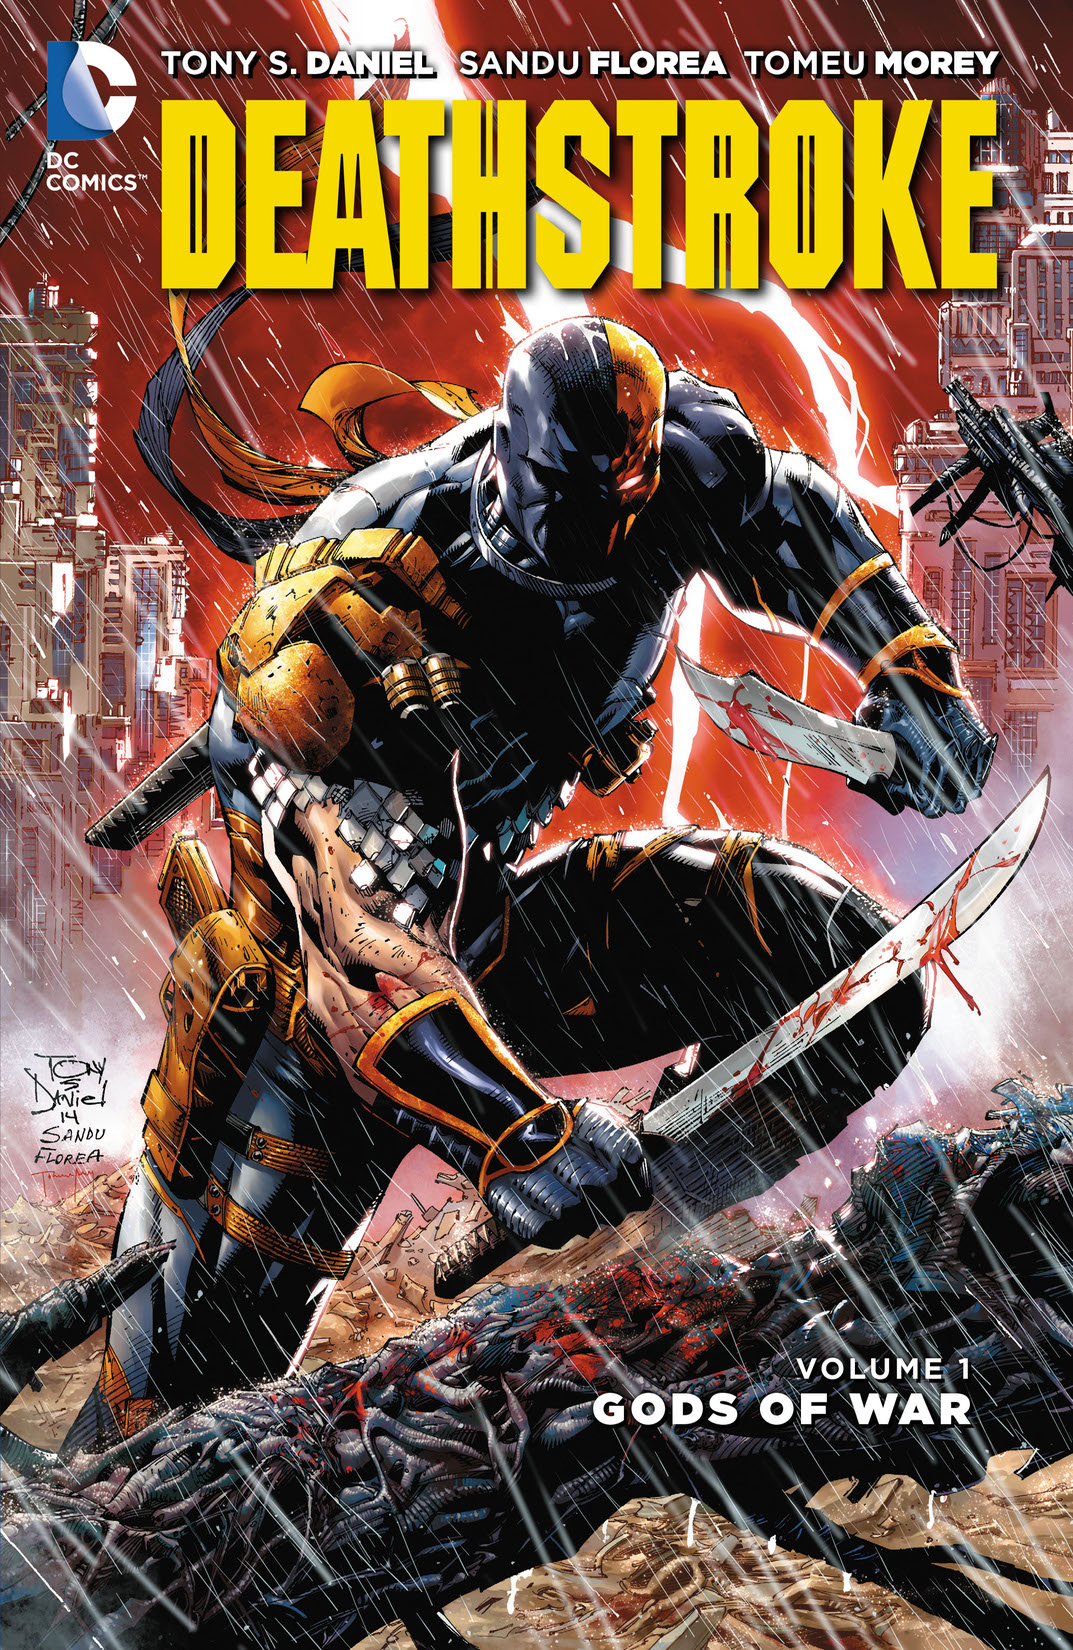 Deathstroke Vol. 1: Gods of Wars preview images